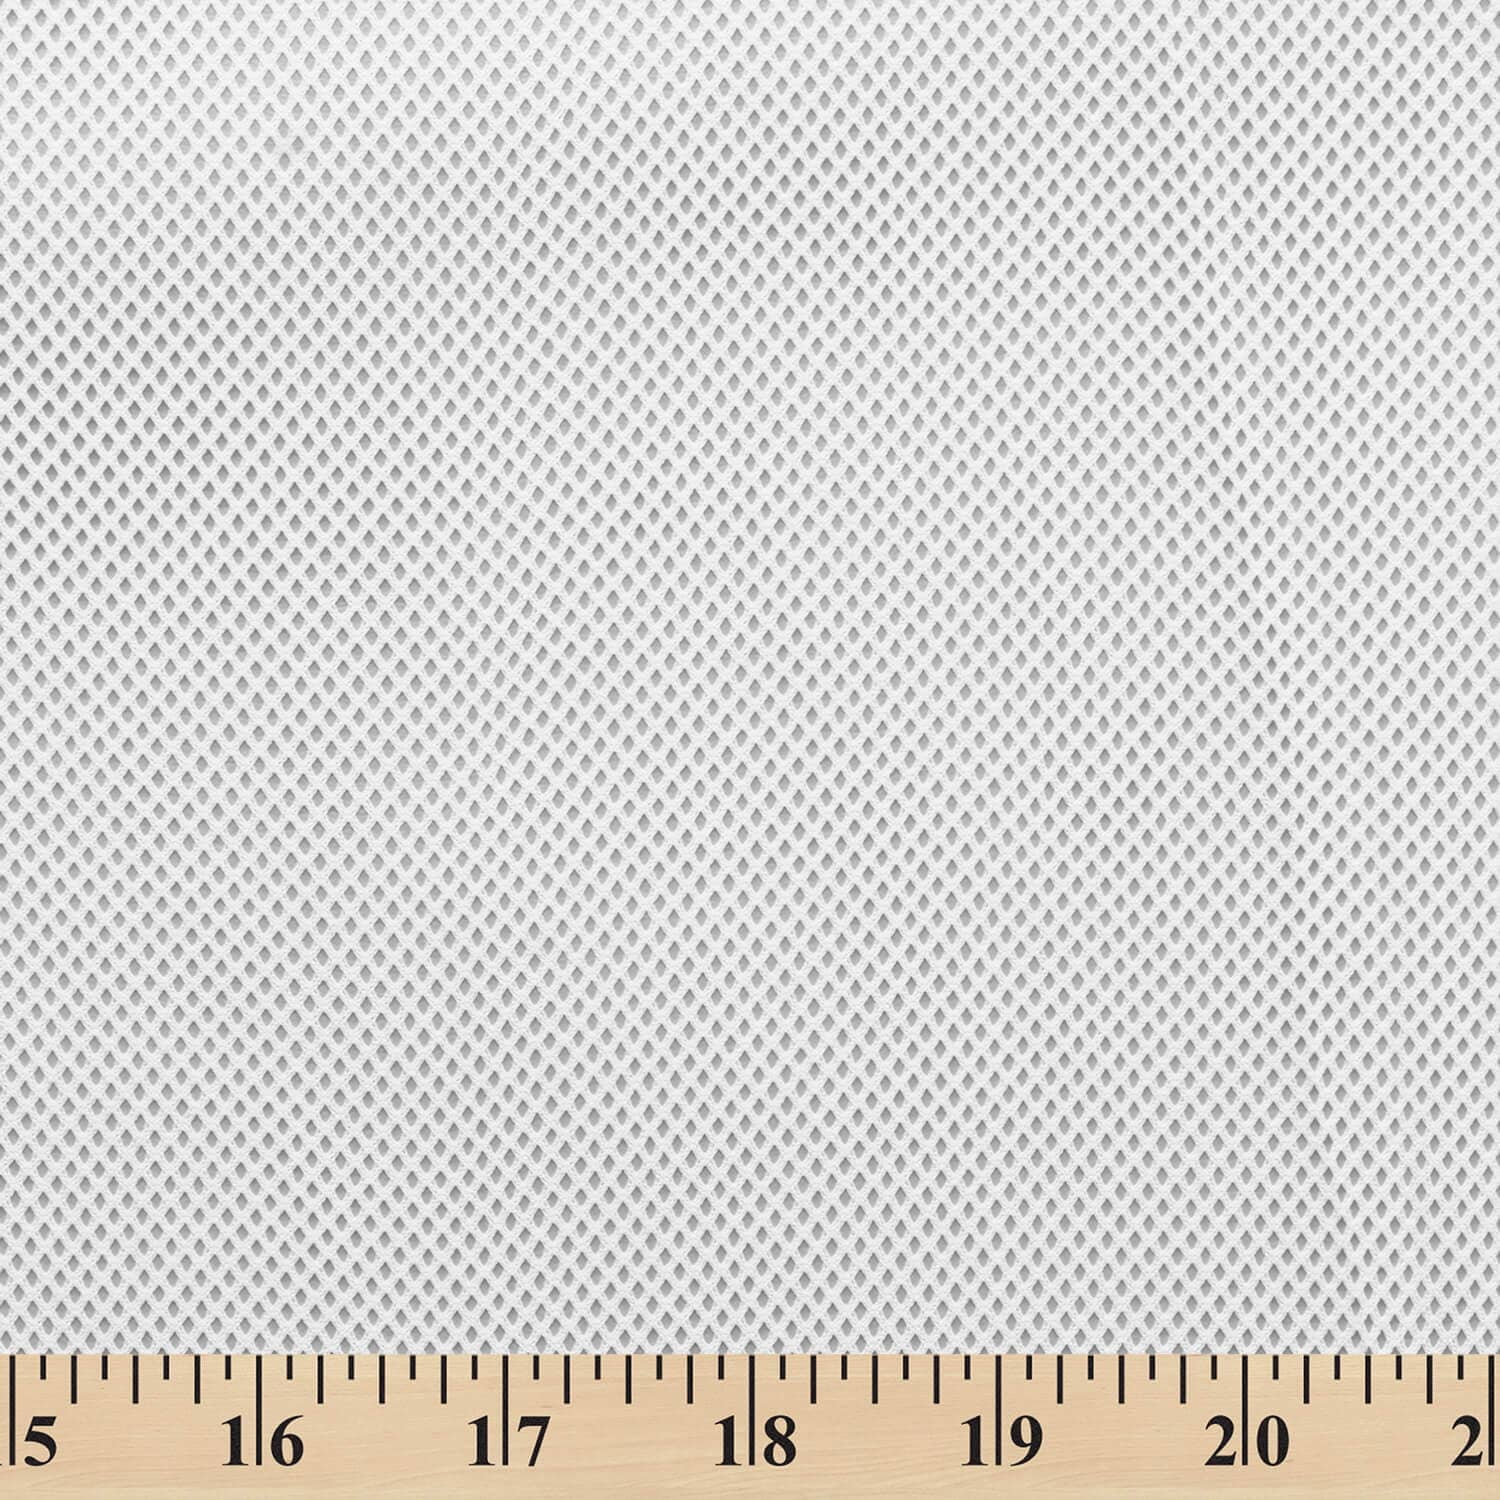 Polyester Knit Diamond Mesh Fabric - White Sheer Polyester 63 By The Yard  